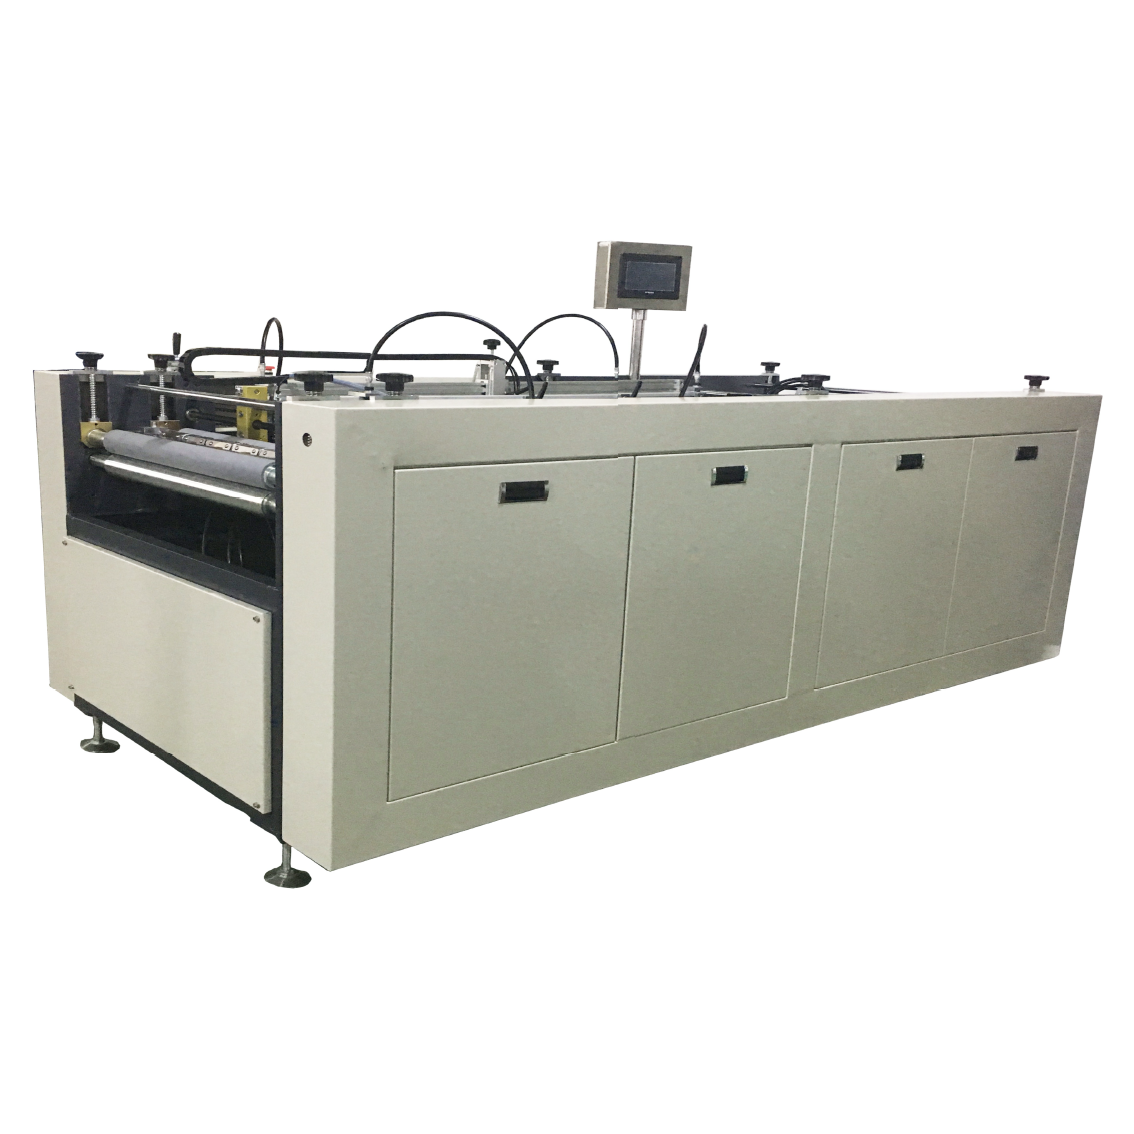 Four-Sided Taping Machine Wrapping & Cover Making Equipment